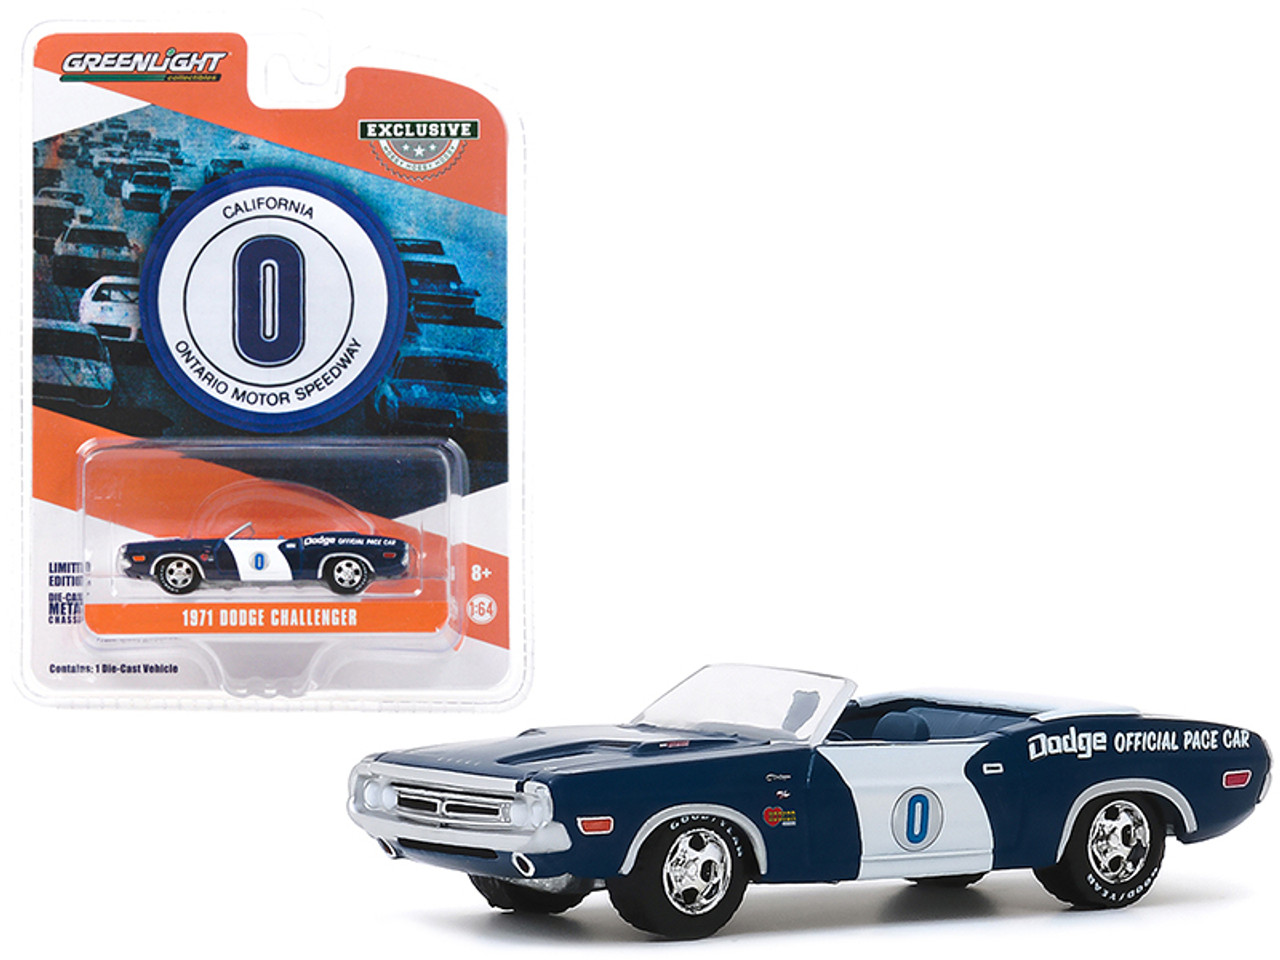 1971 Dodge Challenger Convertible Official Pace Car #0 Blue and White "Ontario Motor Speedway" (California) "Hobby Exclusive" 1/64 Diecast Model Car by Greenlight